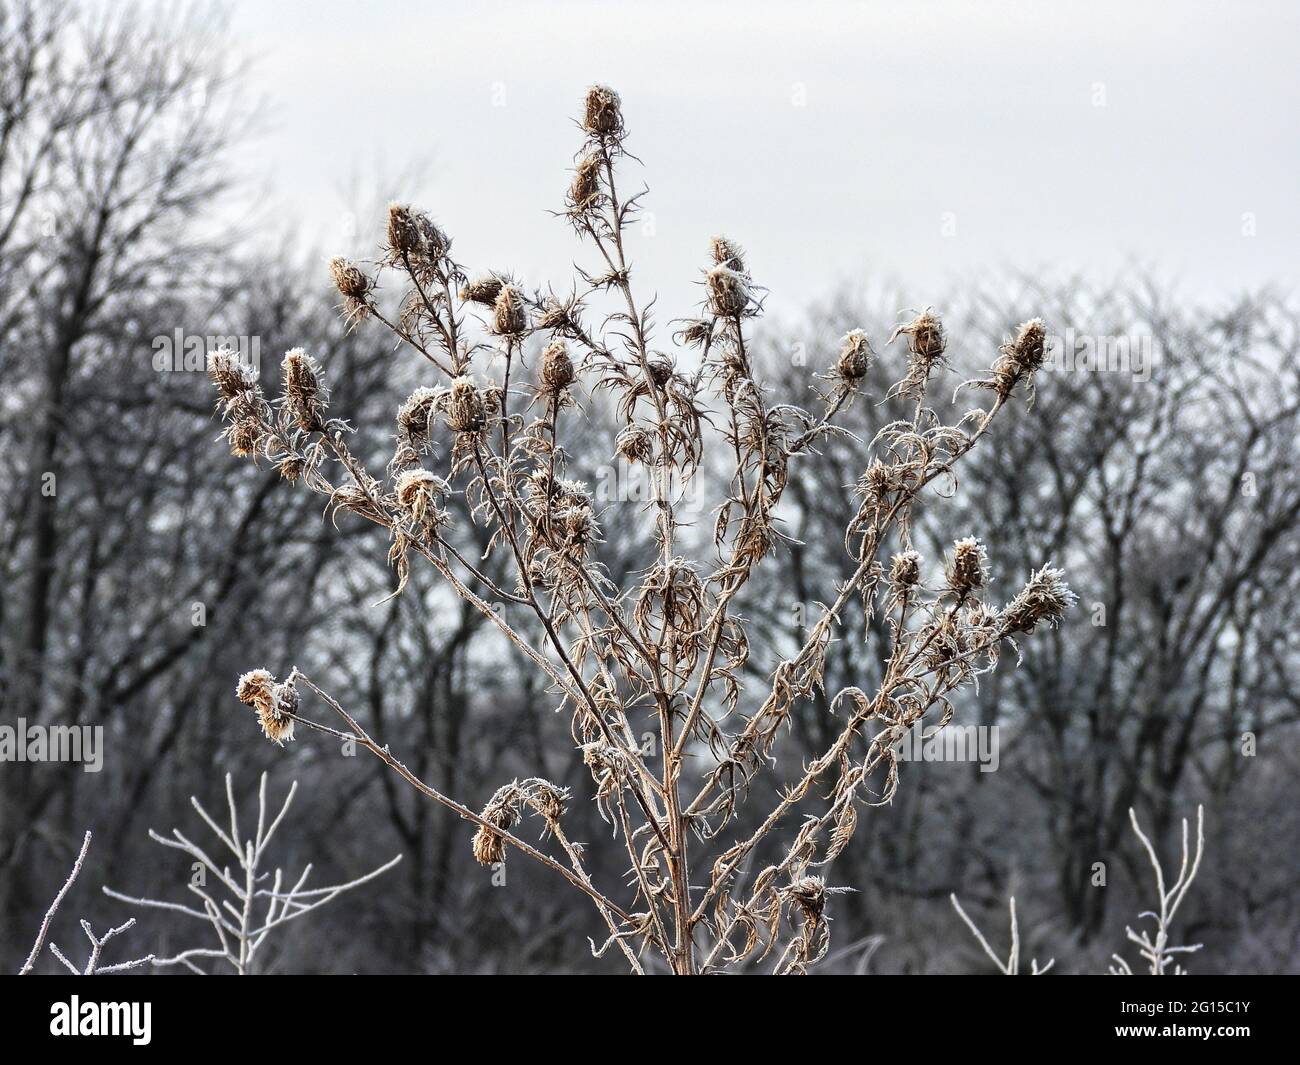 Prairie Plant with Frost: Multiple prairie seed head covered in early morning frost on an overcast winter day Stock Photo